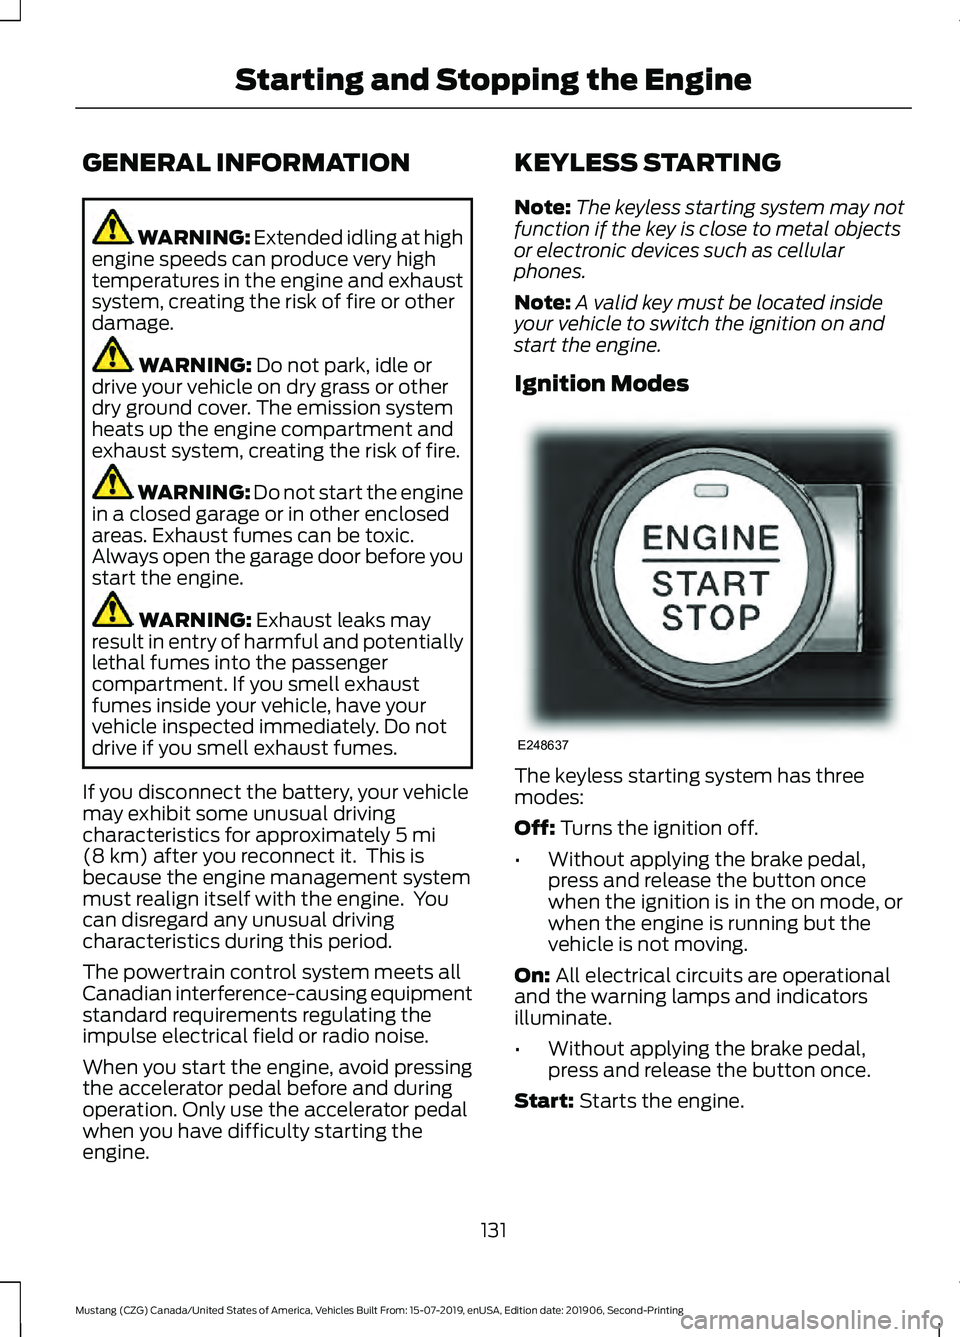 FORD MUSTANG 2020  Owners Manual GENERAL INFORMATION
WARNING: Extended idling at high
engine speeds can produce very high
temperatures in the engine and exhaust
system, creating the risk of fire or other
damage. WARNING: 
Do not park